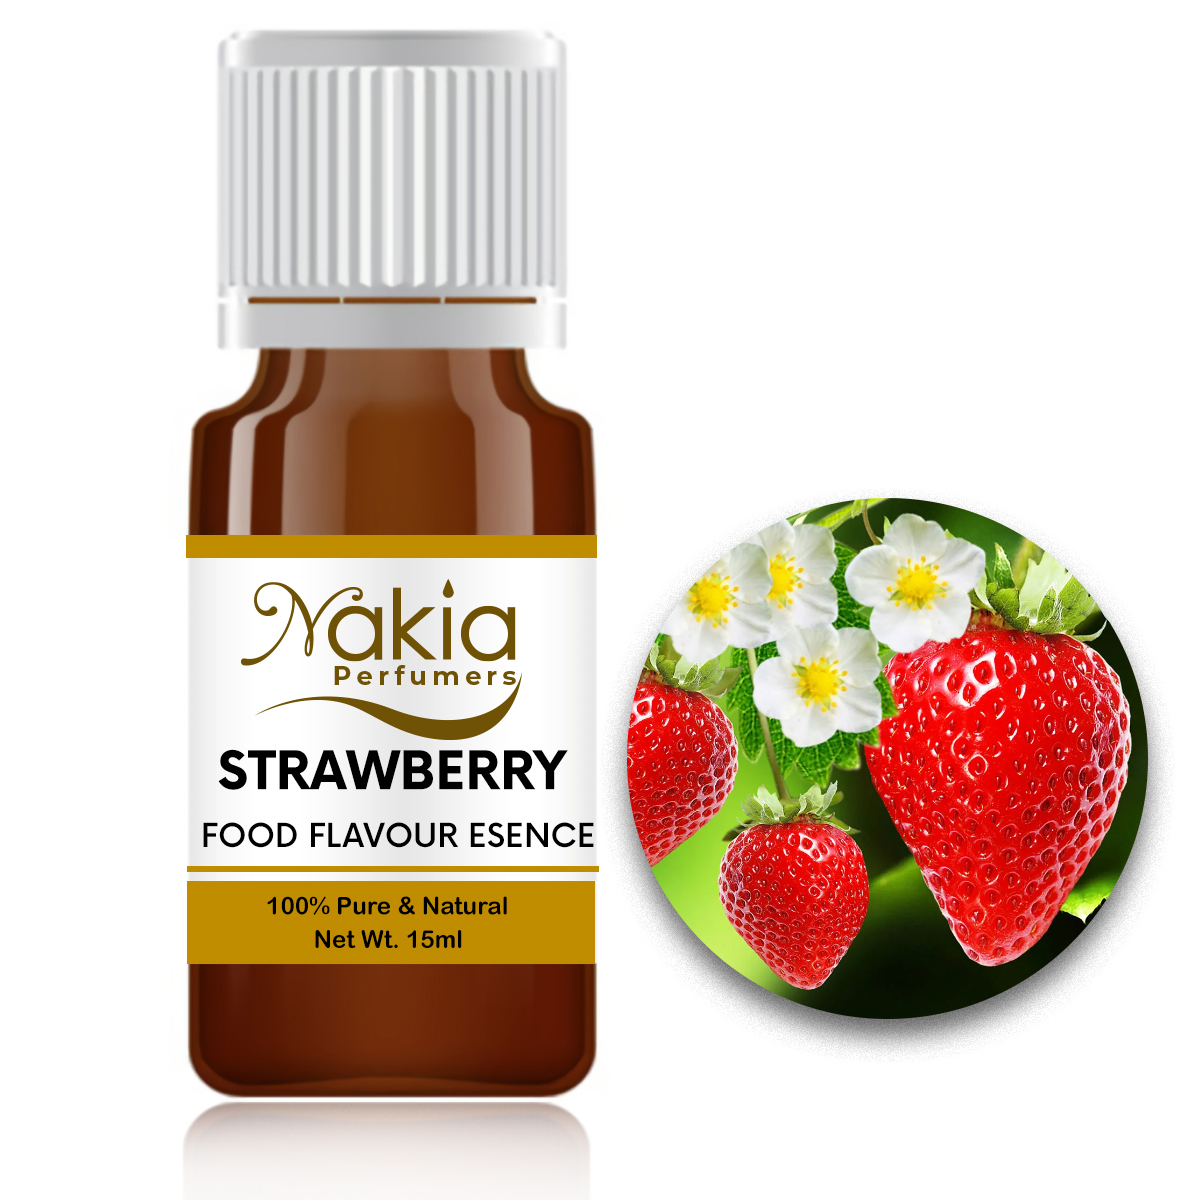 STRAWBERRY FLAVOURING ESSENCE